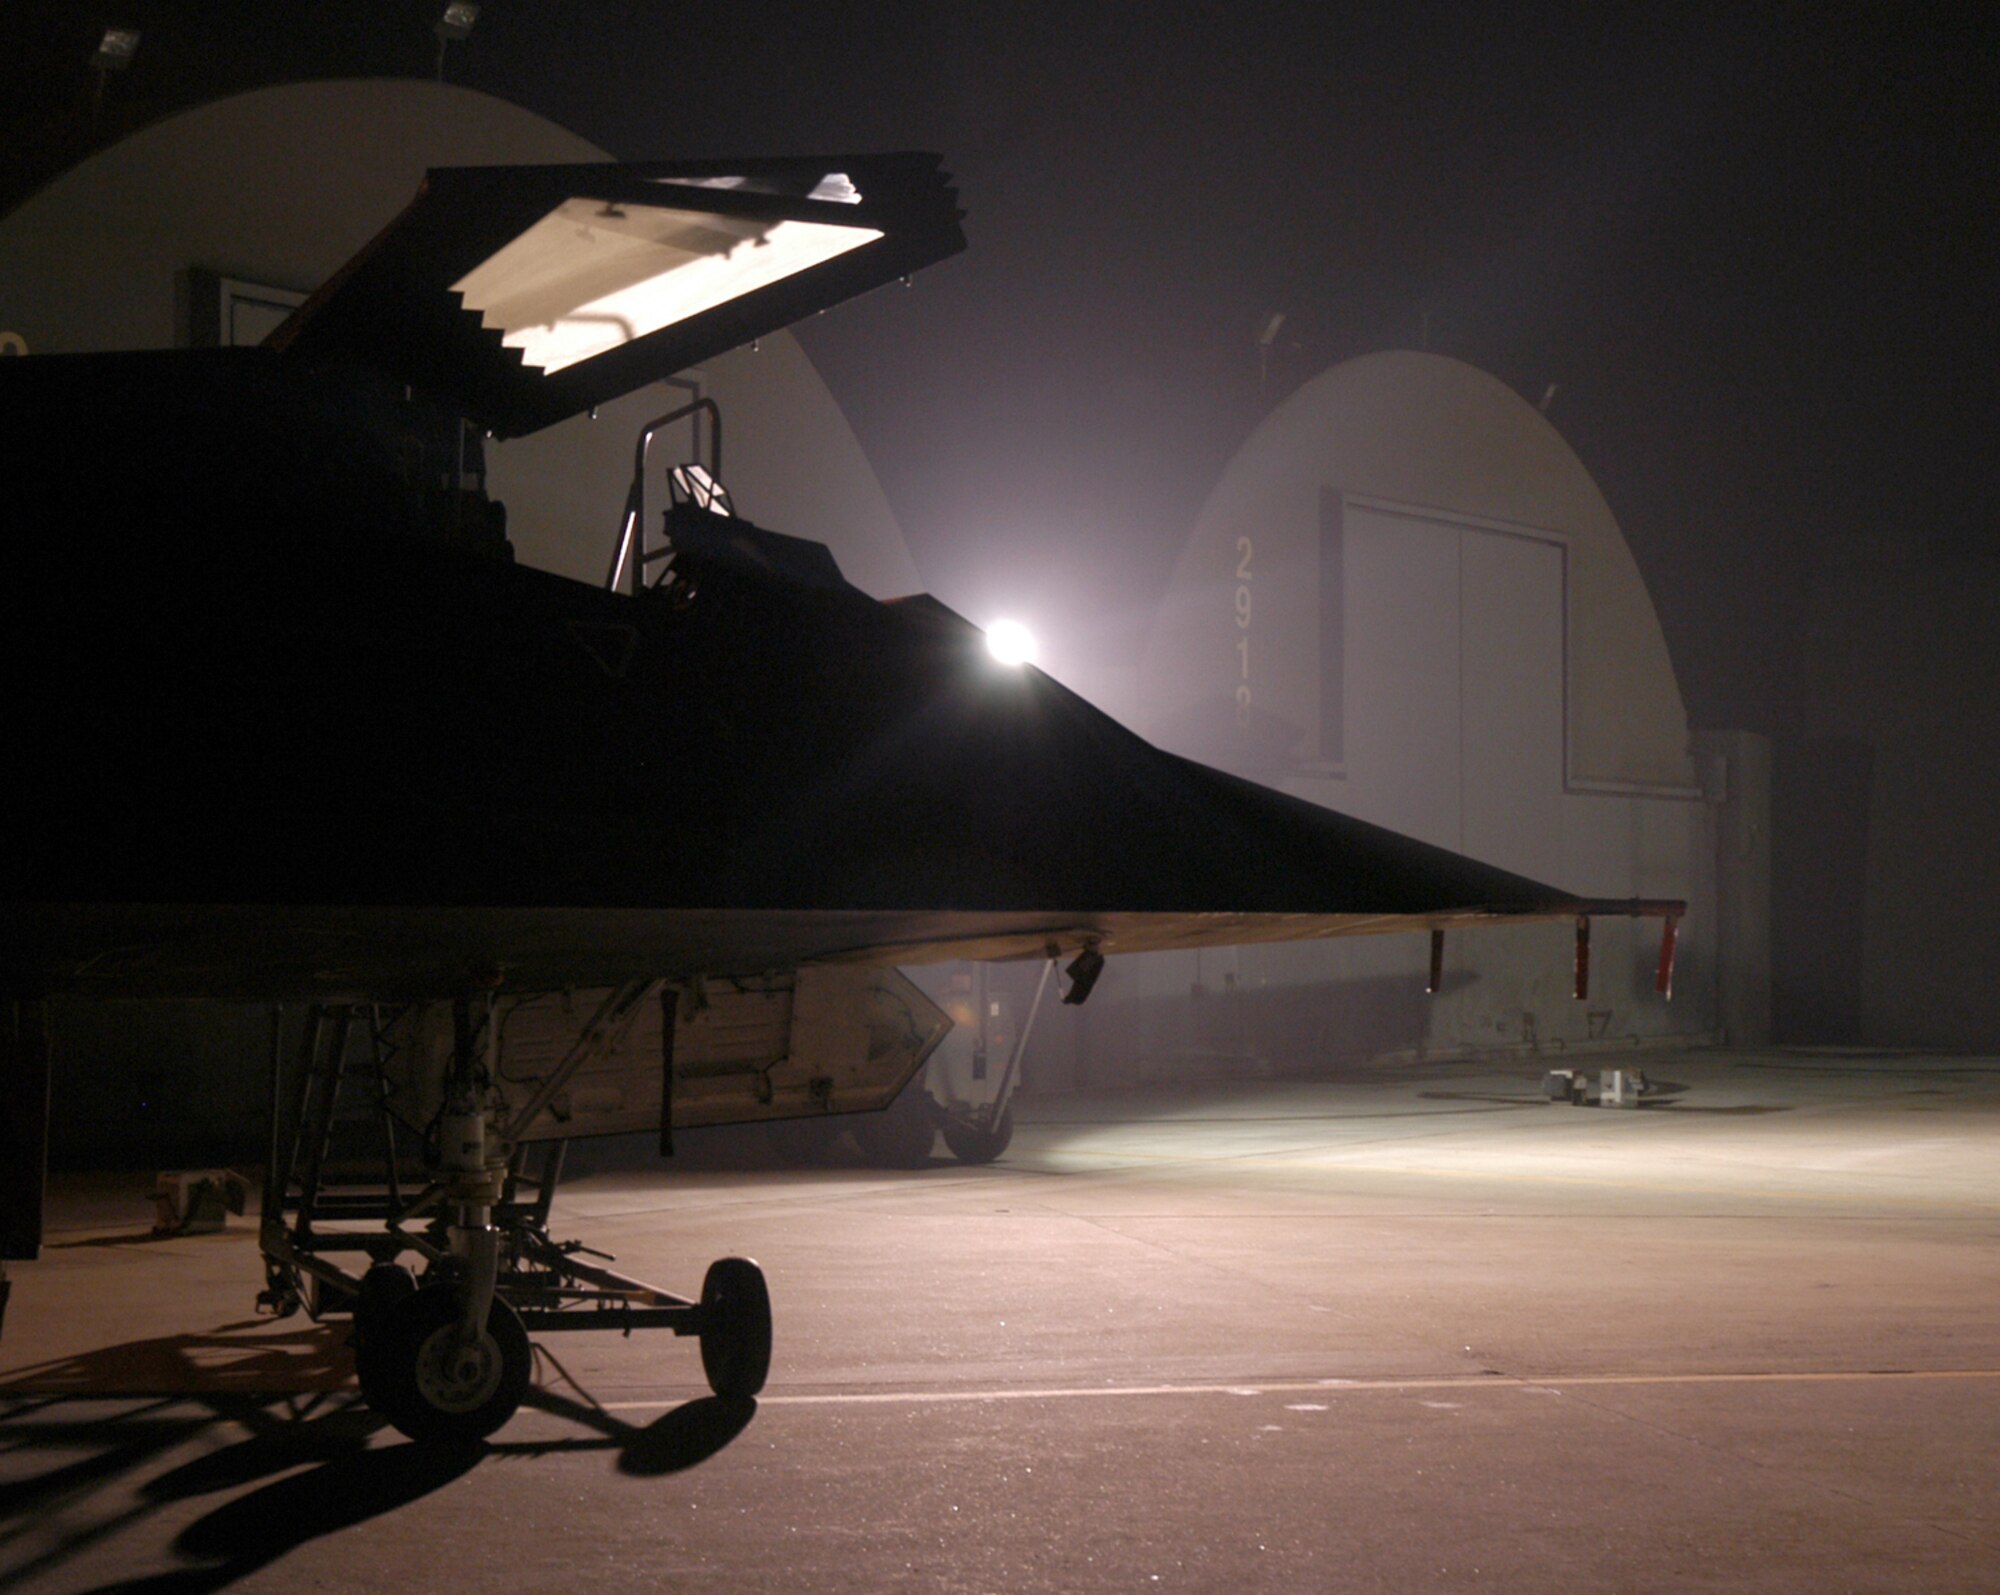 KUNSAN AIR BASE, Republic of Korea  April 9, 2007 -- An F-117 Nighthawk stealth fighter sits ready for take off April 9 here. The F-117s began redeploying last week, with the final aircraft leaving April 9 for Holloman Air Force Base, N.M. The low-observable aircraft, assigned to the 9th Expeditionary Fighter Squadron, have been deployed to Kunsan since early January. Maintainers and support personnel are expected to redeploy in the coming week. (U.S. Air Force photo/Senior Airman Stephen Collier)